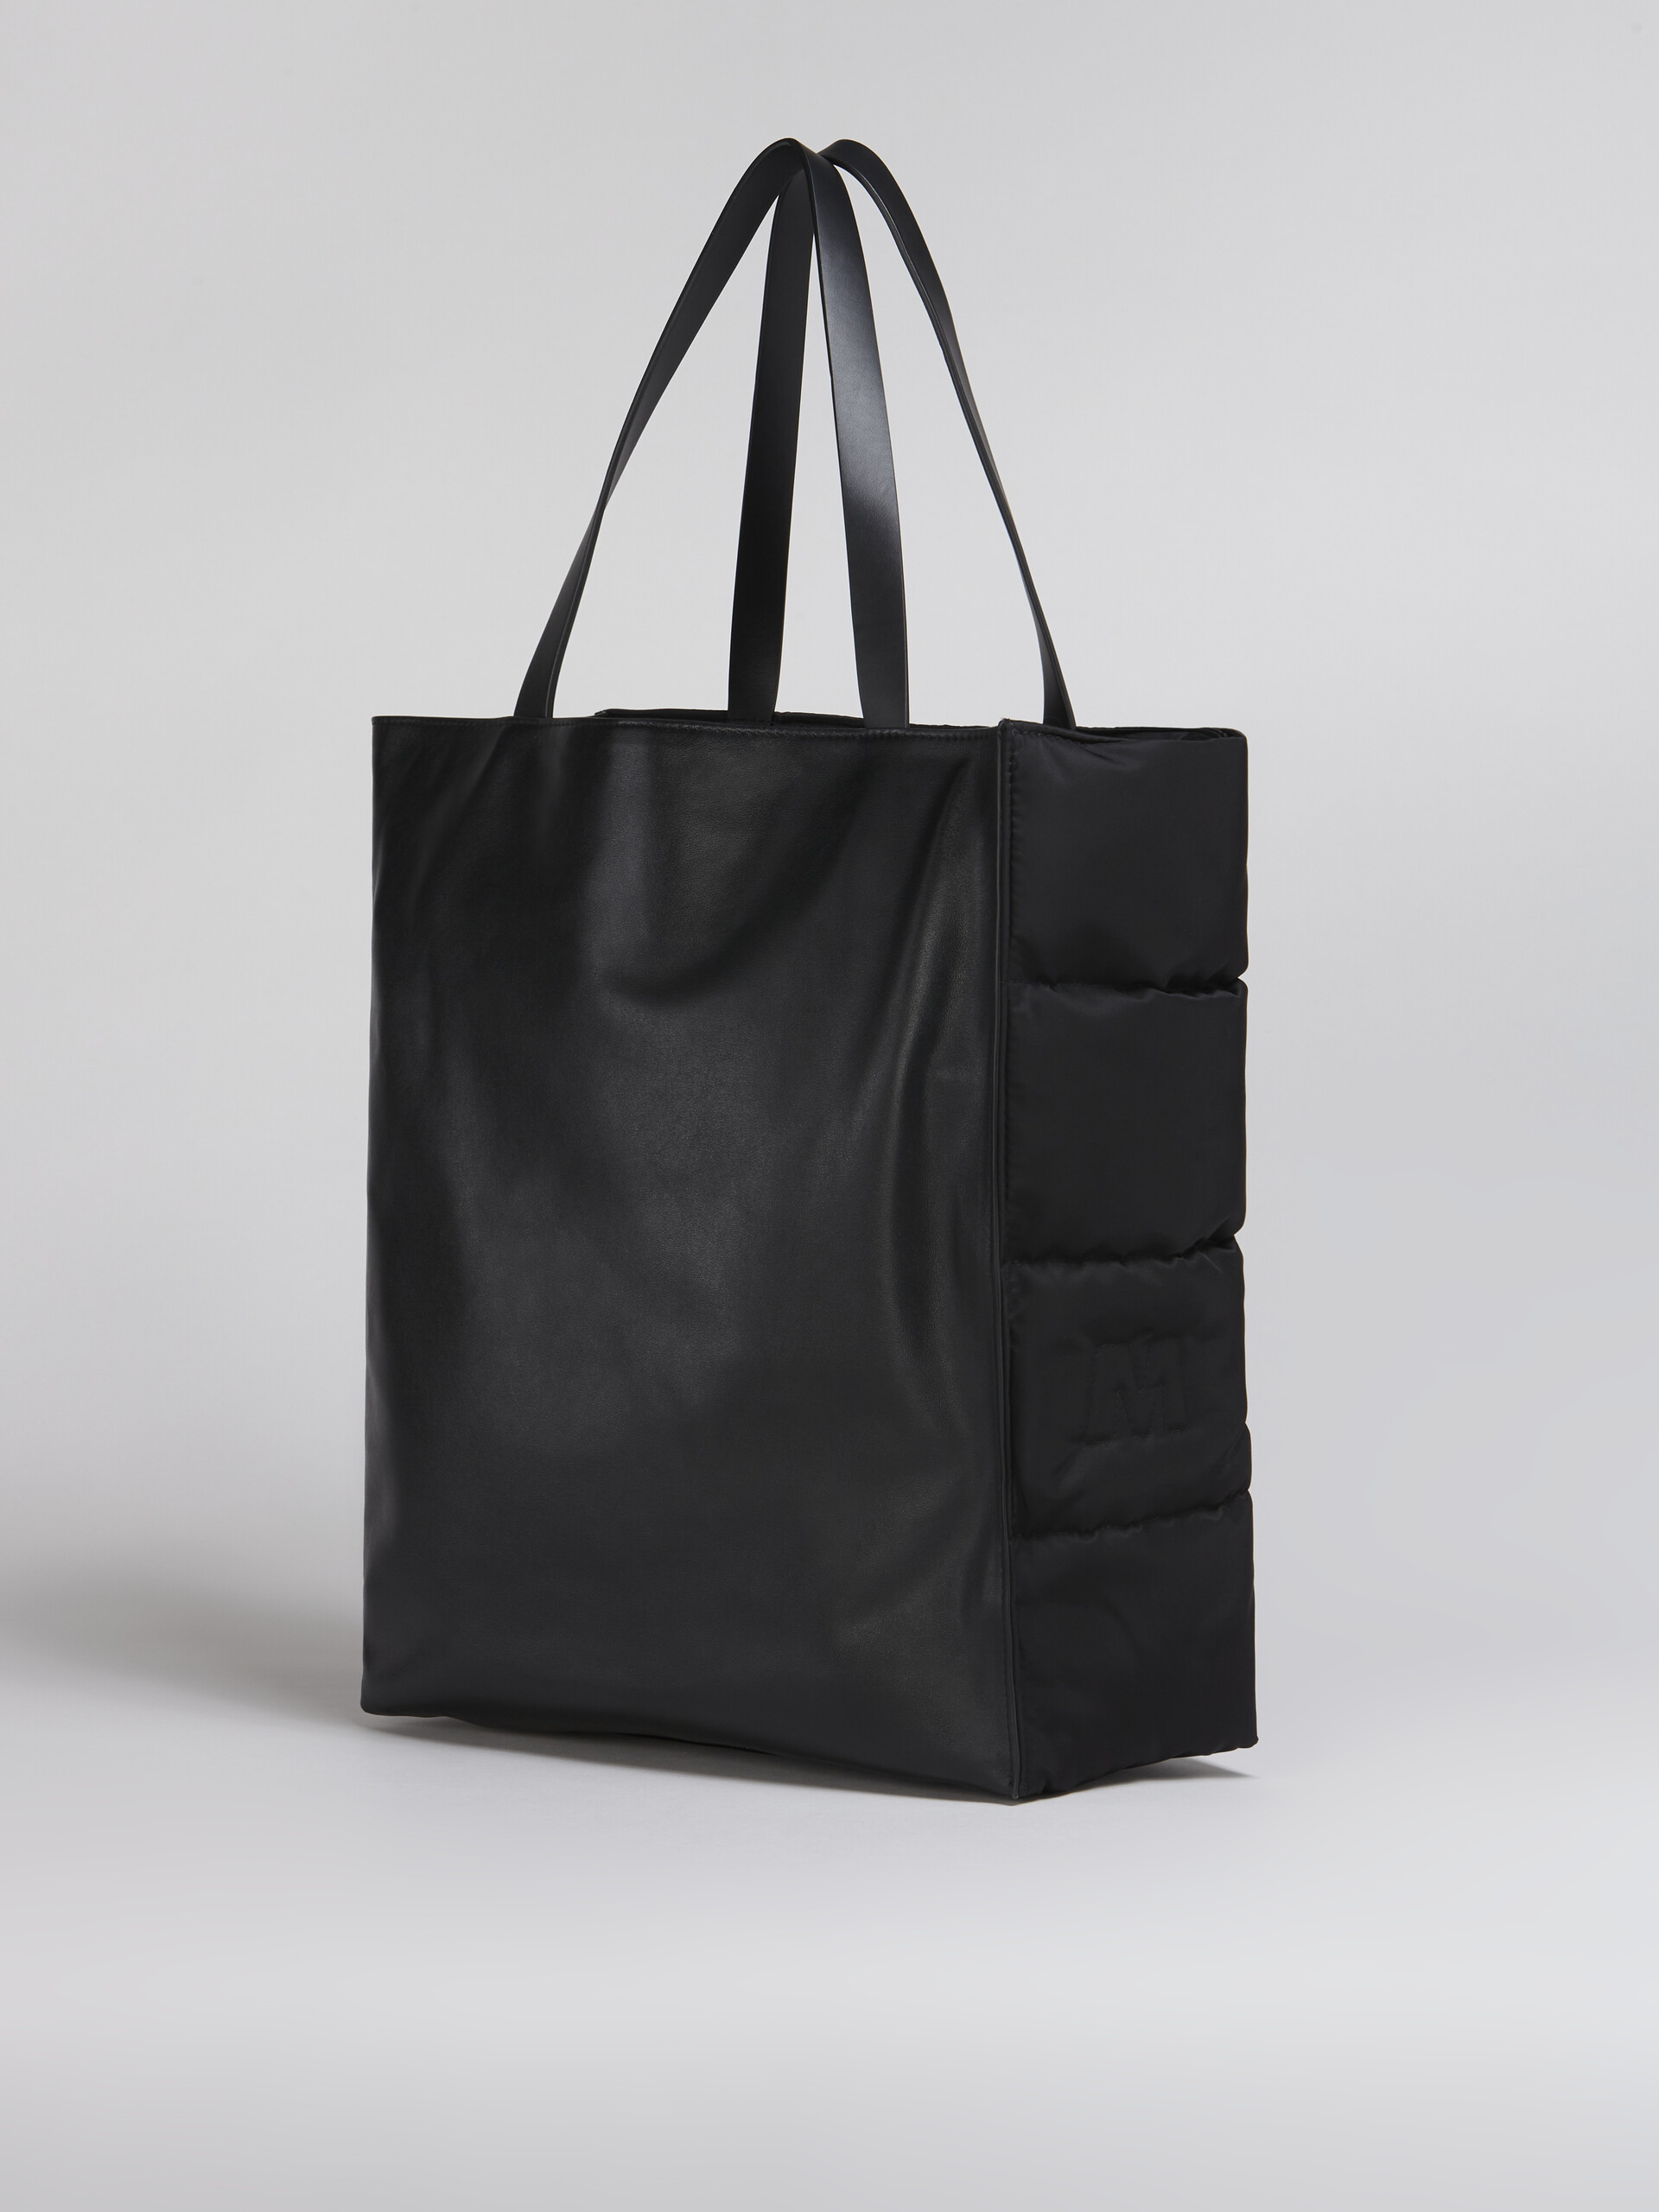 Black MUSEO SOFT tote bag in quilted nylon - Shopping Bags - Image 3